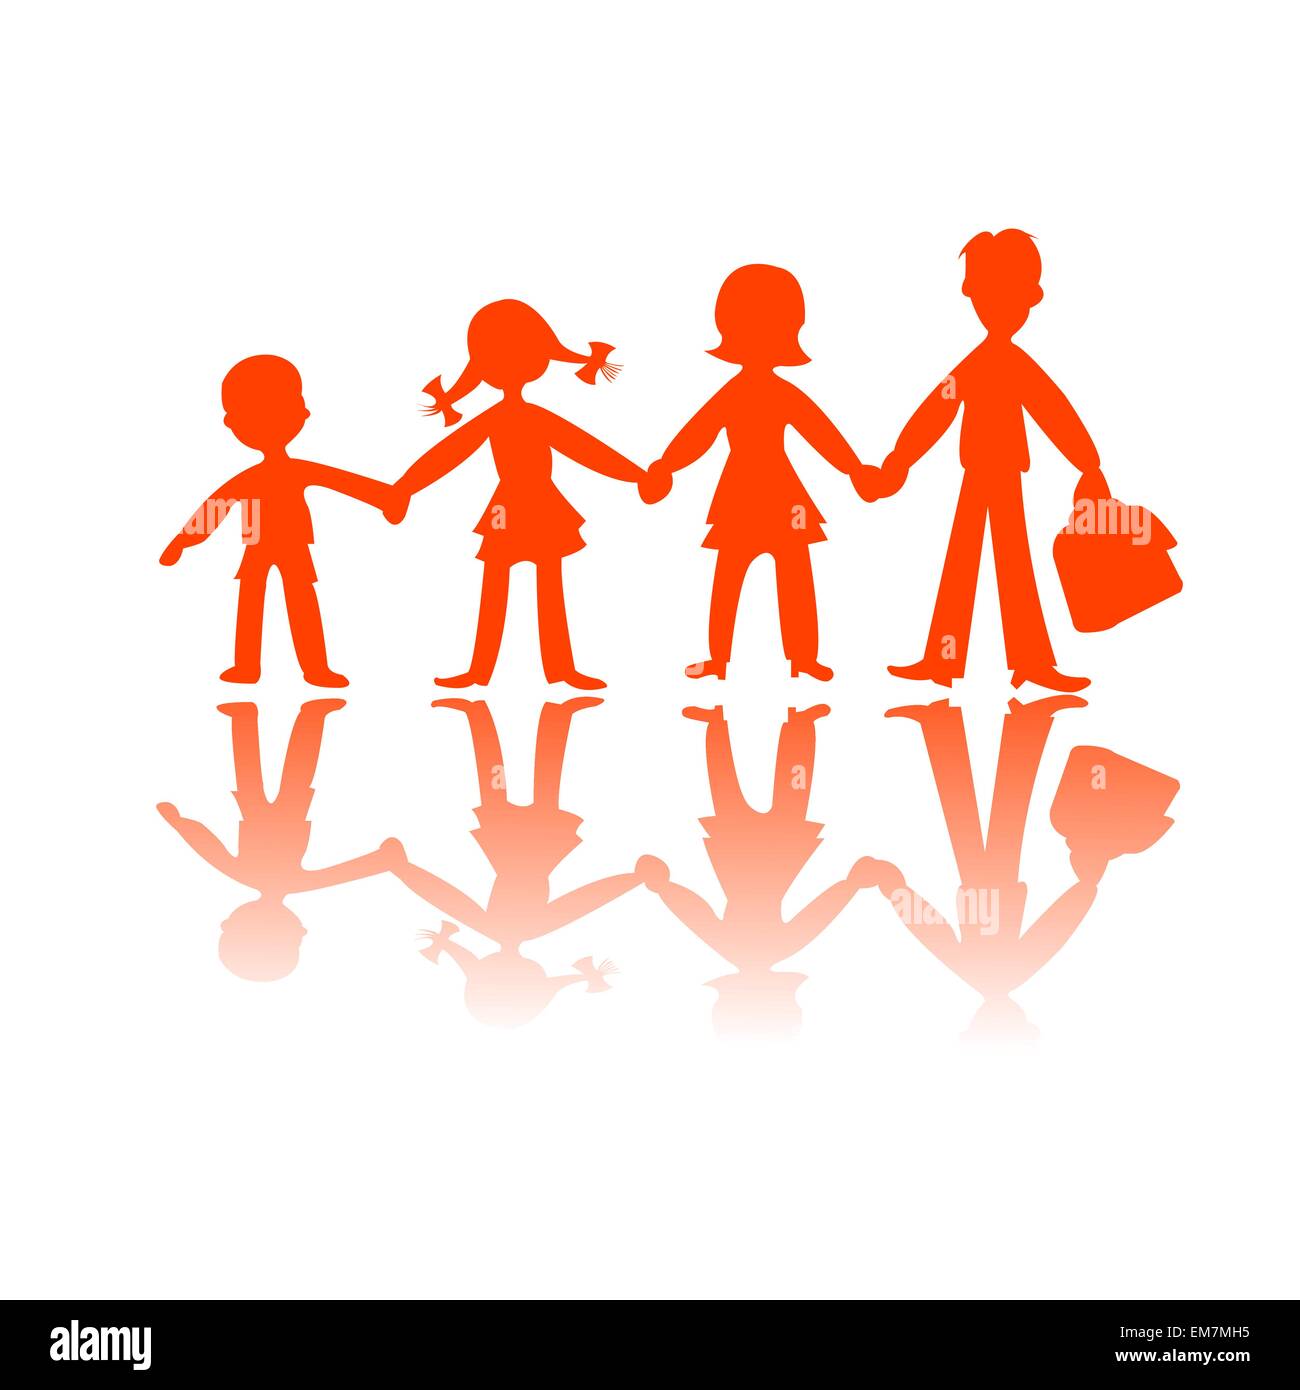 four kids silhouettes Stock Vector